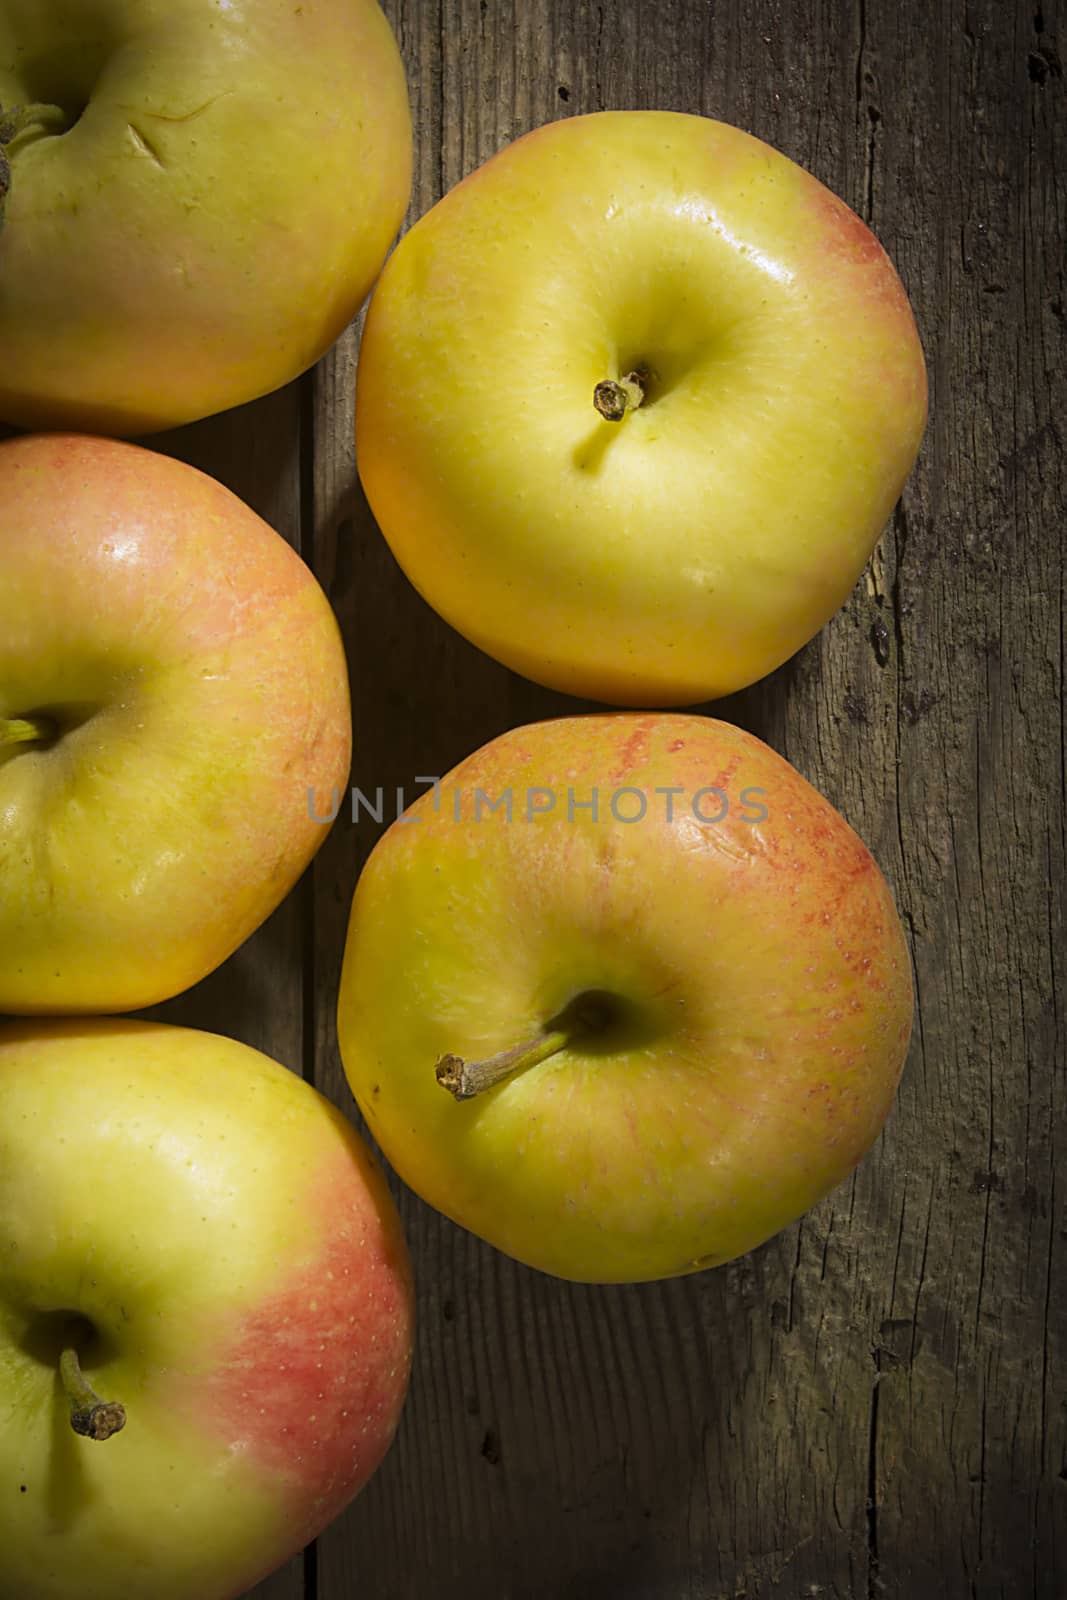 Lots of ripe apples on an old wooden surface